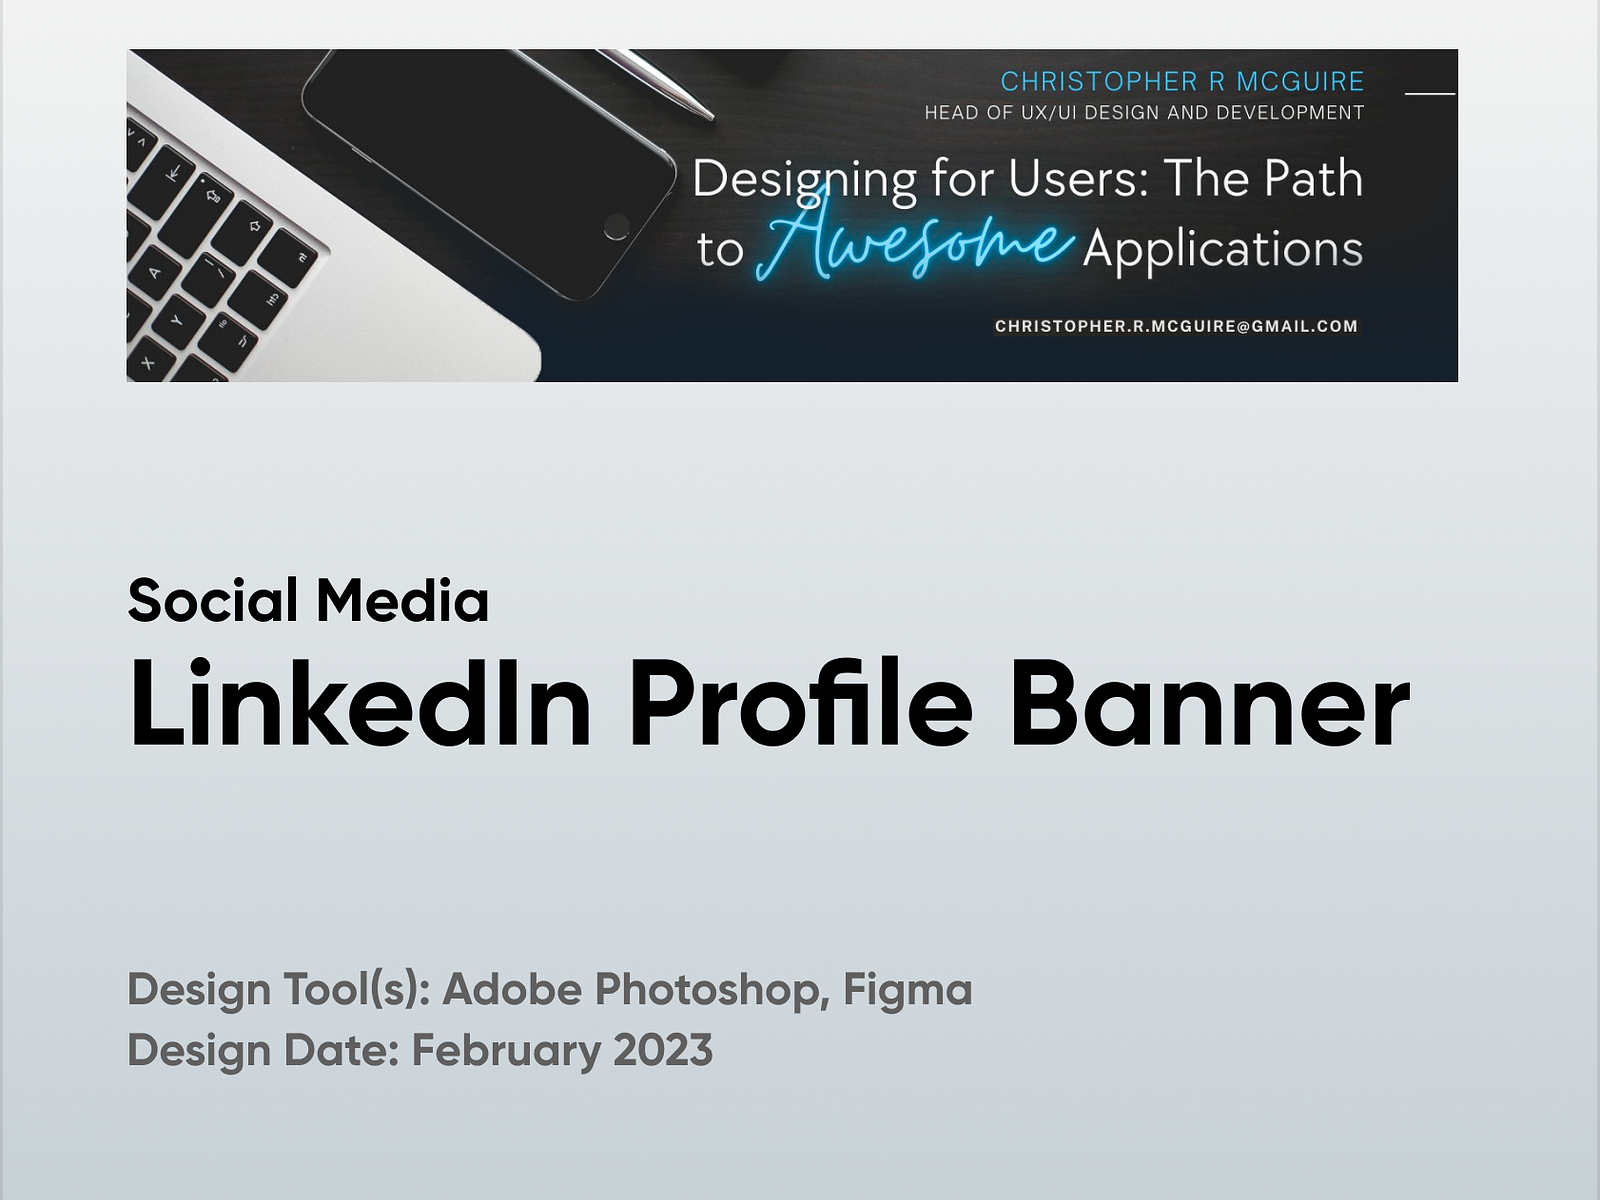 linkedin-profile-banner-by-christopher-r-mcguire-on-dribbble